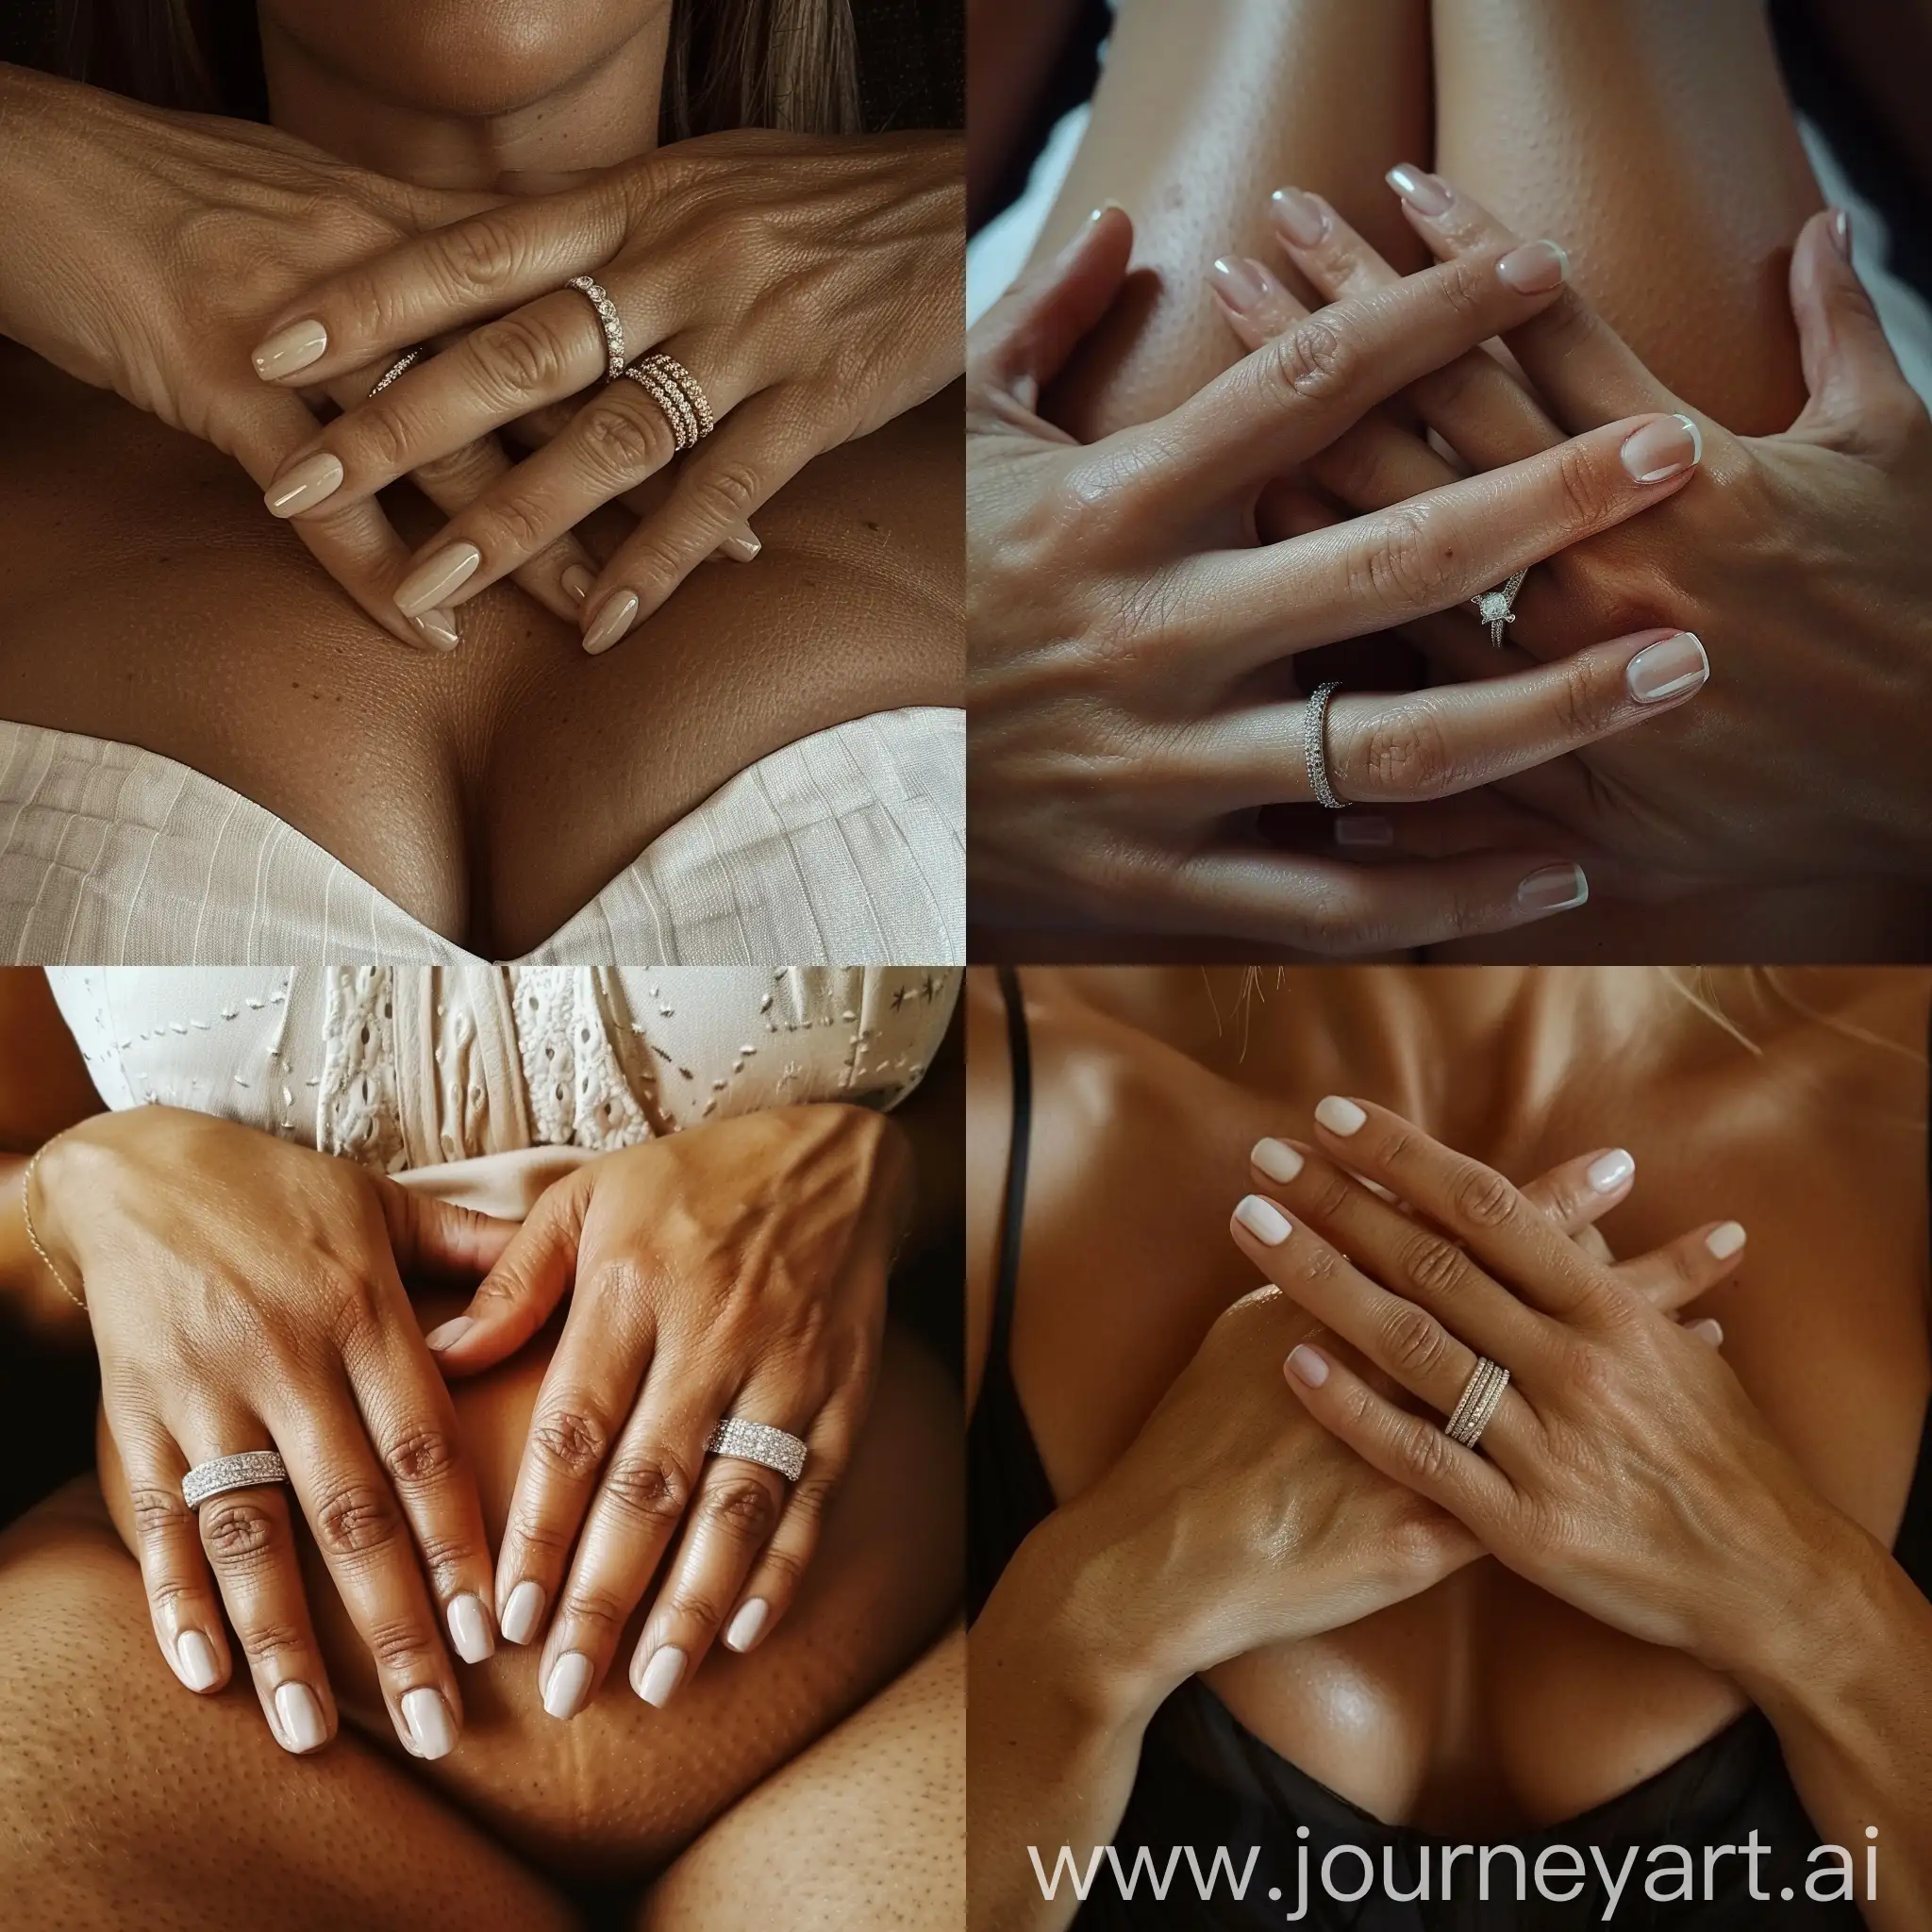 Instagram photo: A woman's hands resting atop her large torso, wedding ring, close up shot, perfect nails